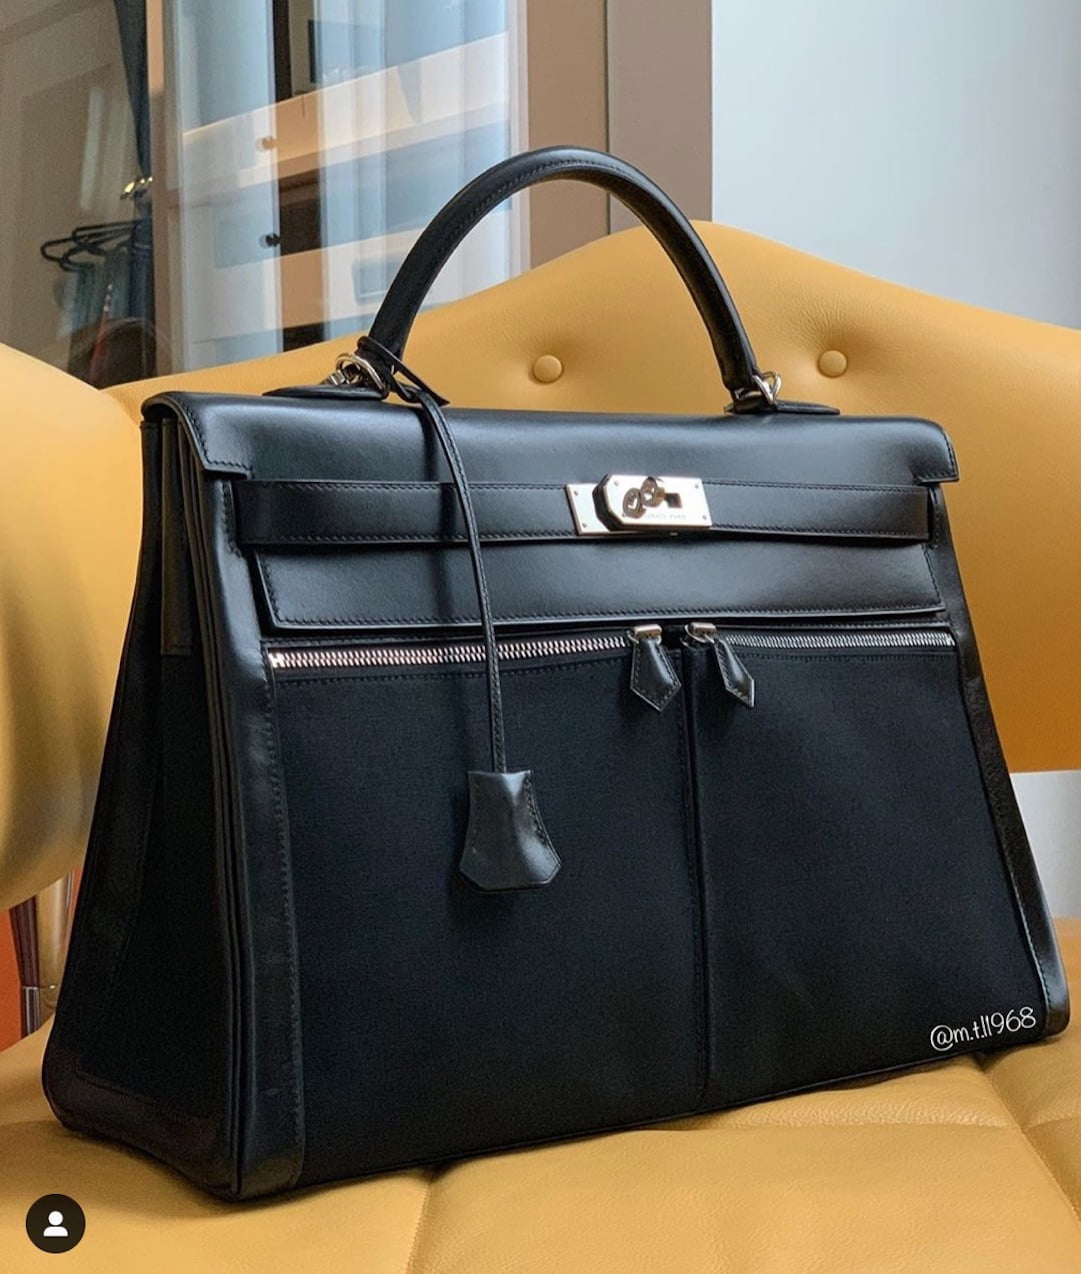 Another Hermes Cargo Birkin but this time in size 25! 🤩 what do